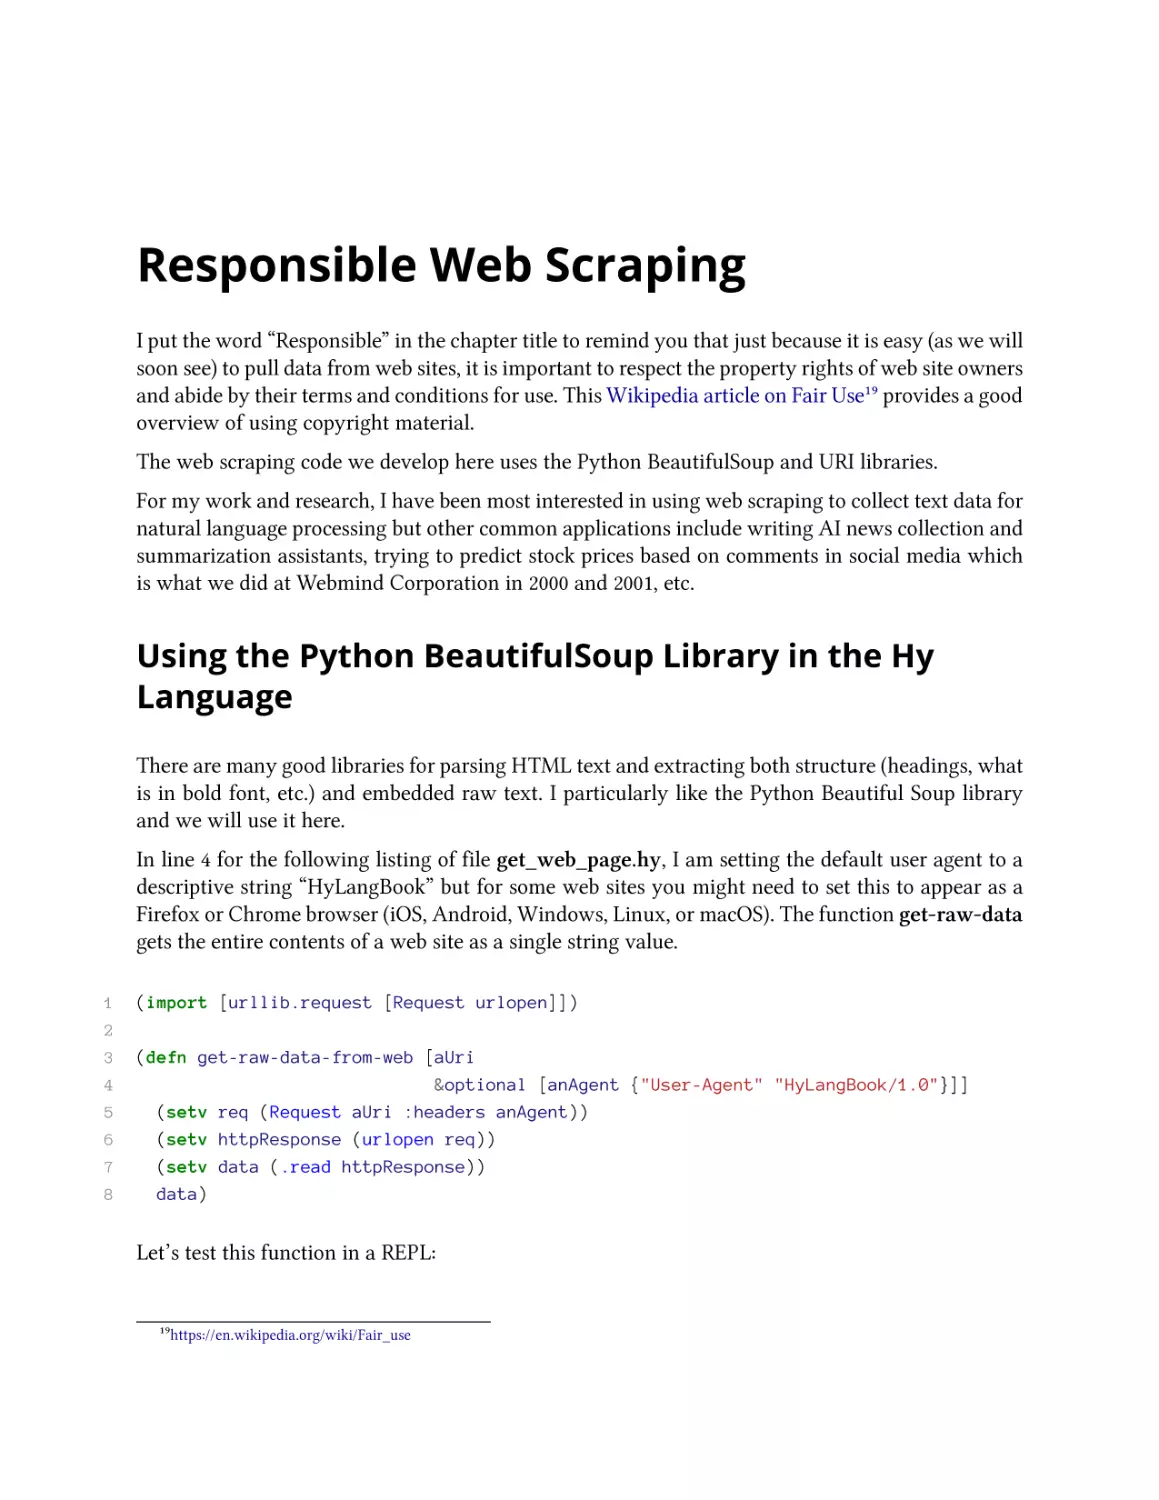 Responsible Web Scraping
Using the Python BeautifulSoup Library in the Hy Language